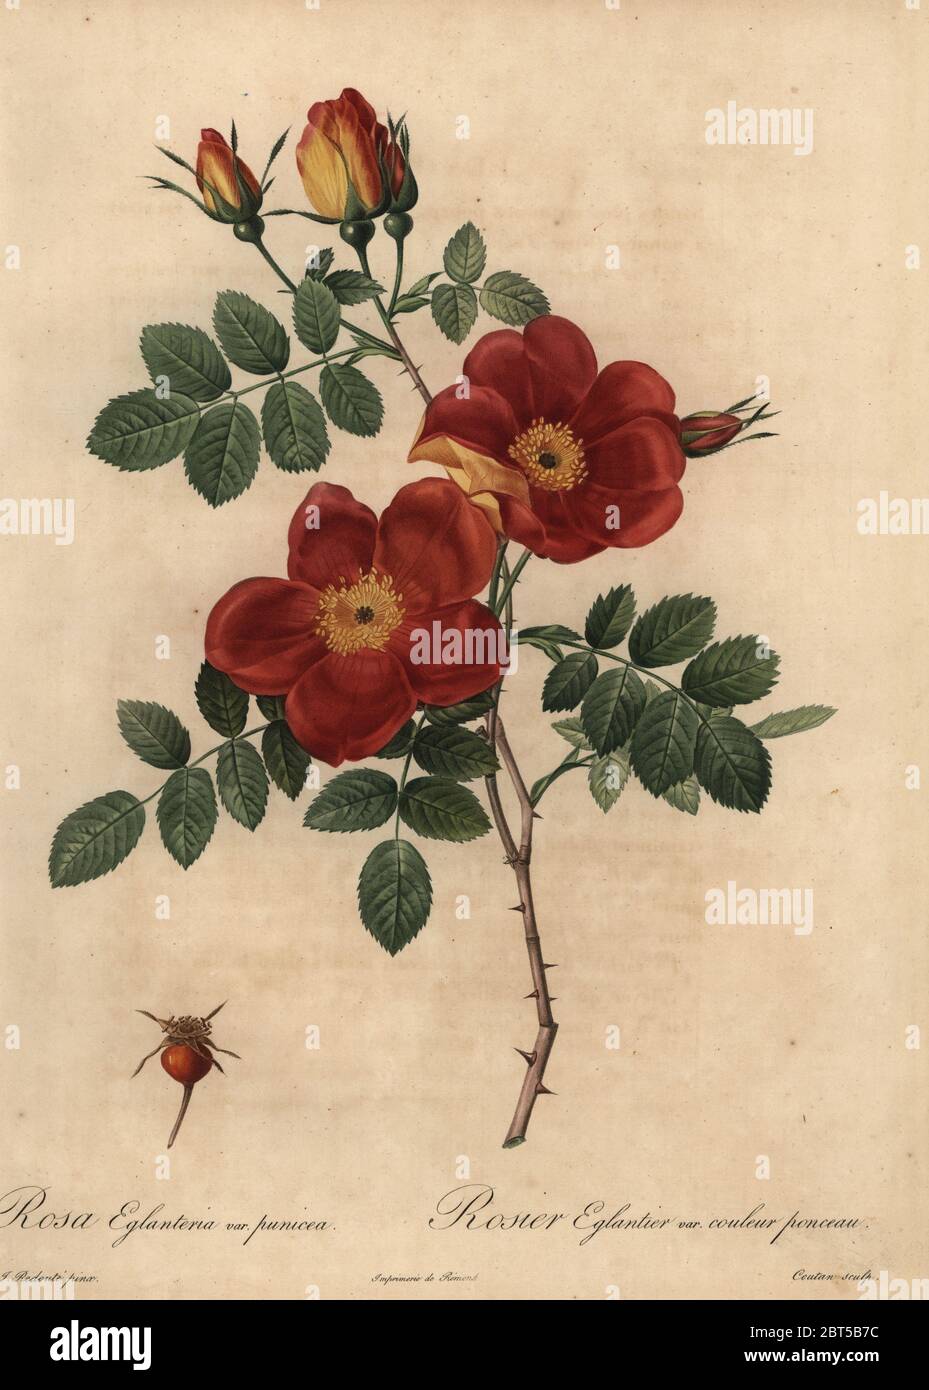 Copper rose, Rosa eglanteria var. punicea, Rosier Eglantier var. couleur ponceau, Rosier Capucine. Stipple copperplate engraving by Coutan handcoloured a la poupee after a botanical illustration by Pierre-Joseph Redoute from the first folio edition of Les Roses, Firmin Didot, Paris, 1817. Stock Photo